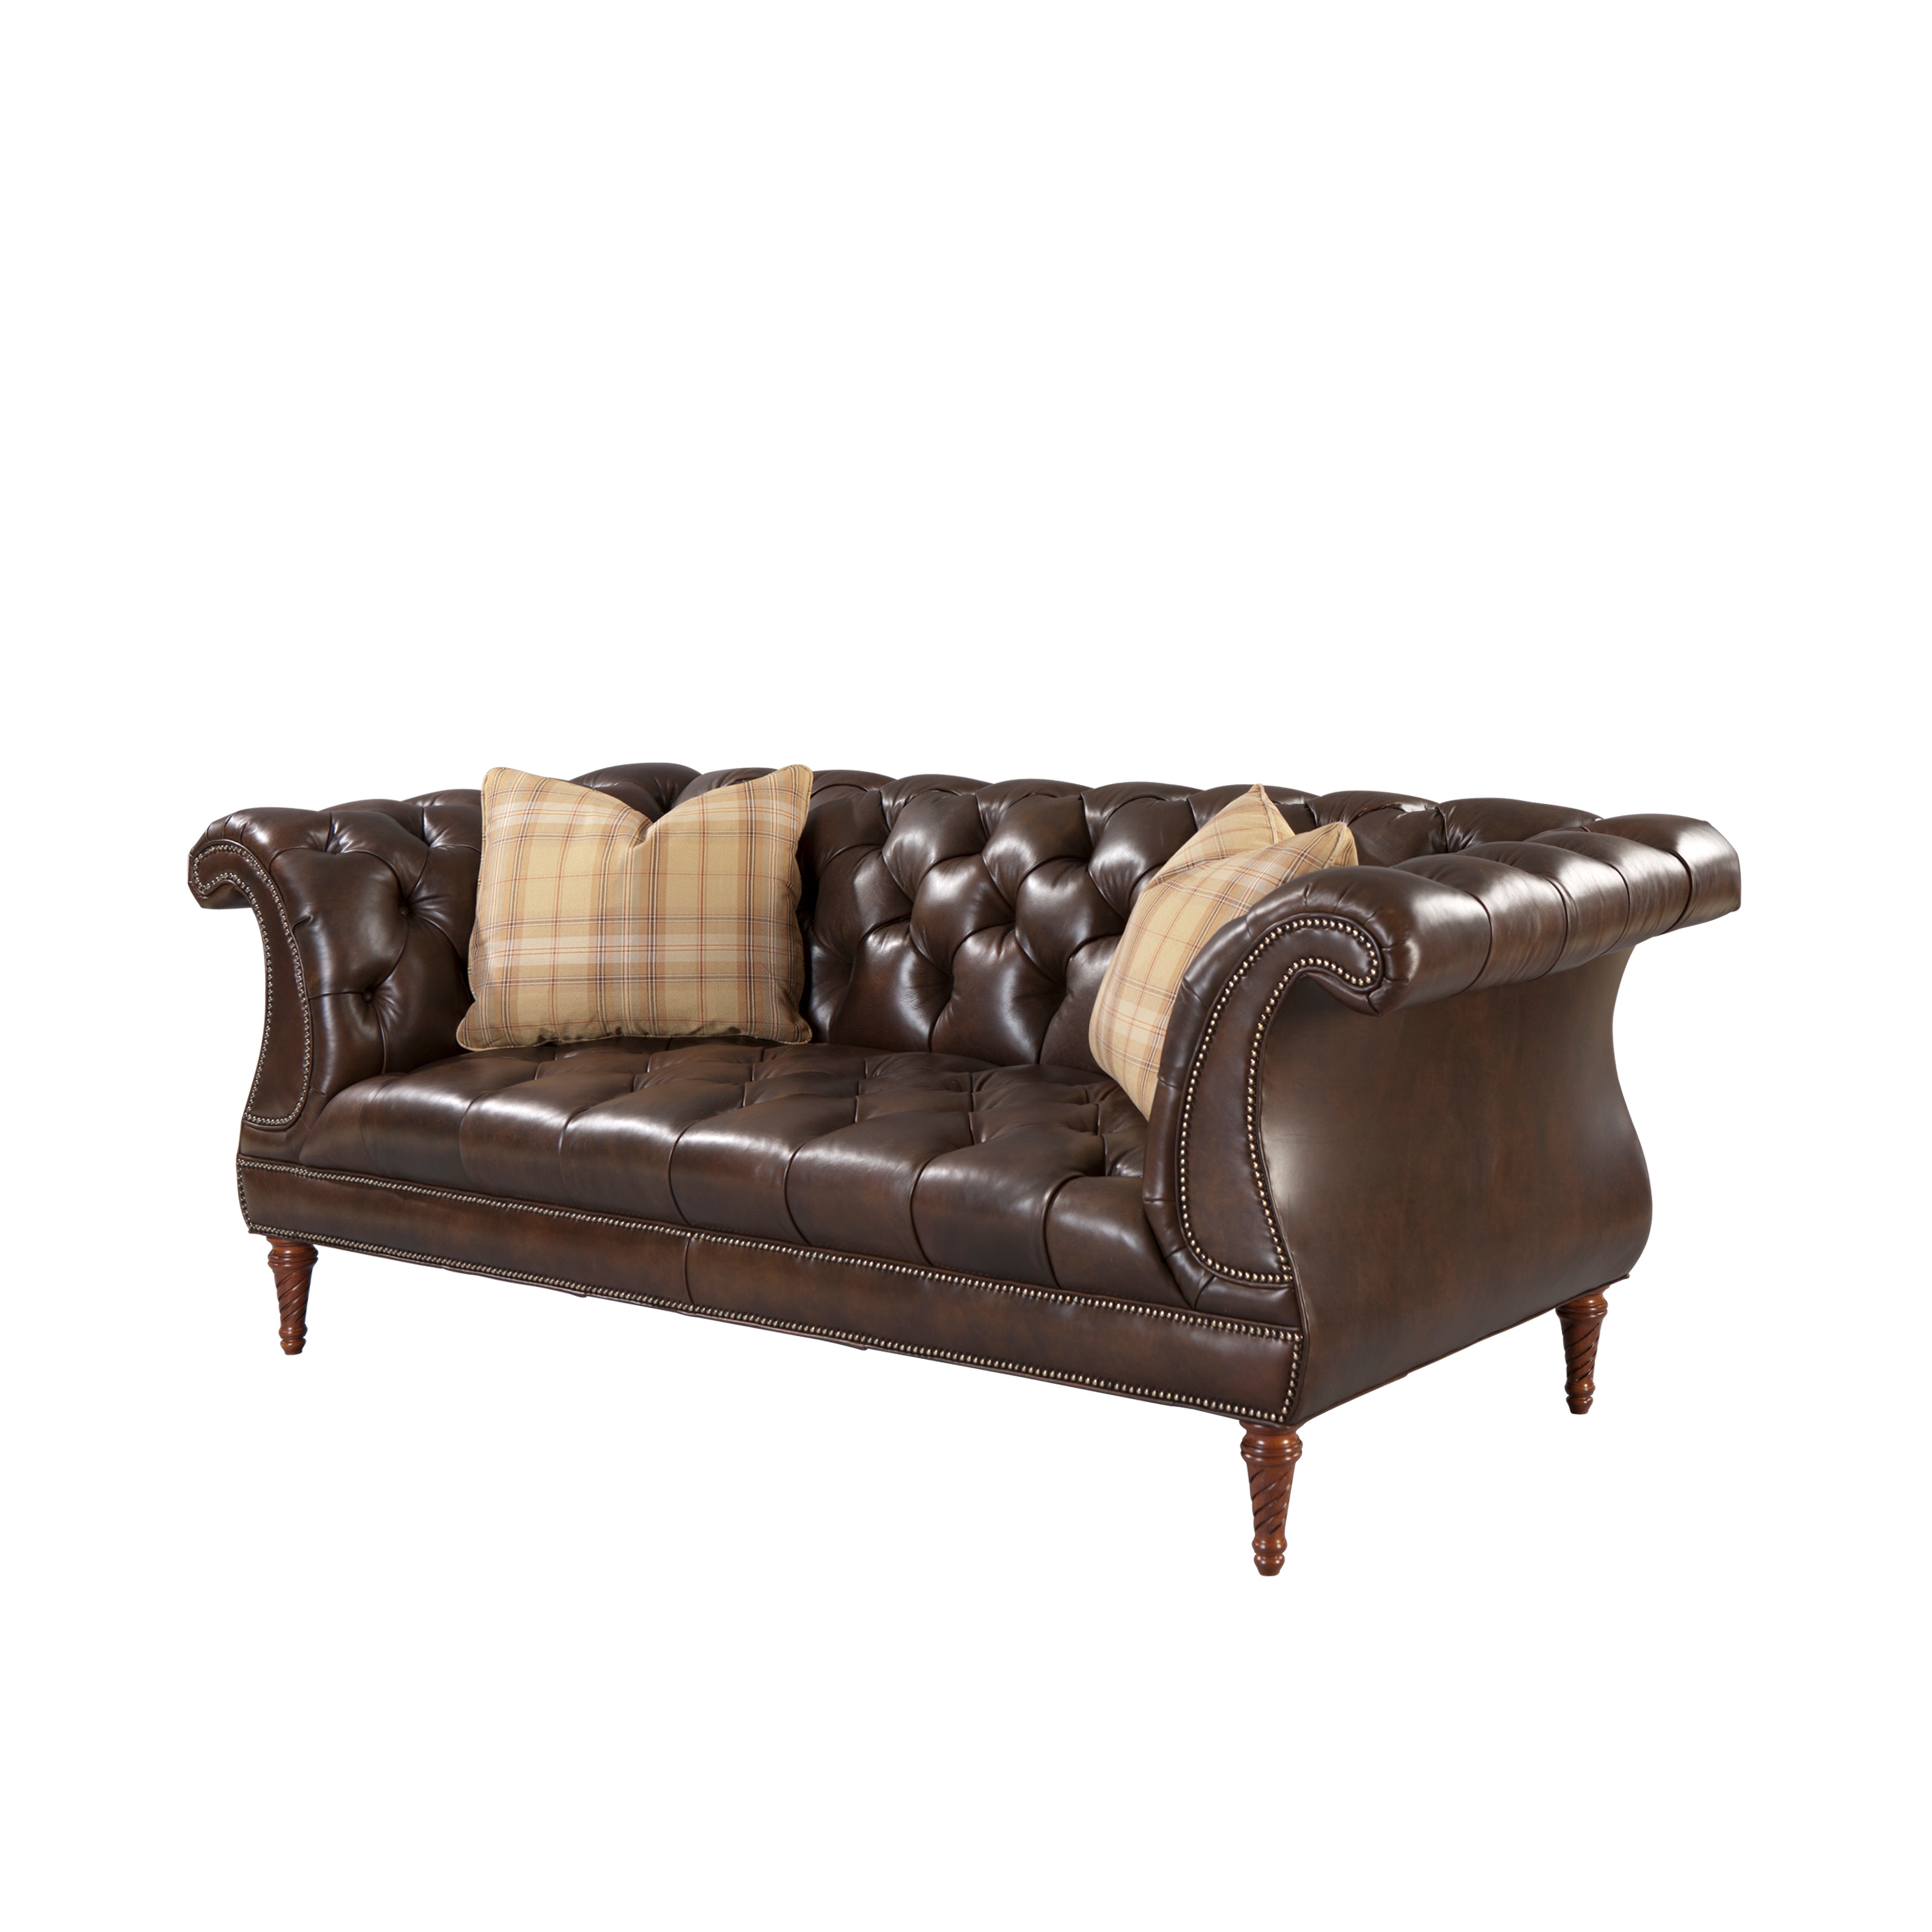 Chesterfield Original Hide Regency Chesterfield Brown Leather Library Reading Armchair 